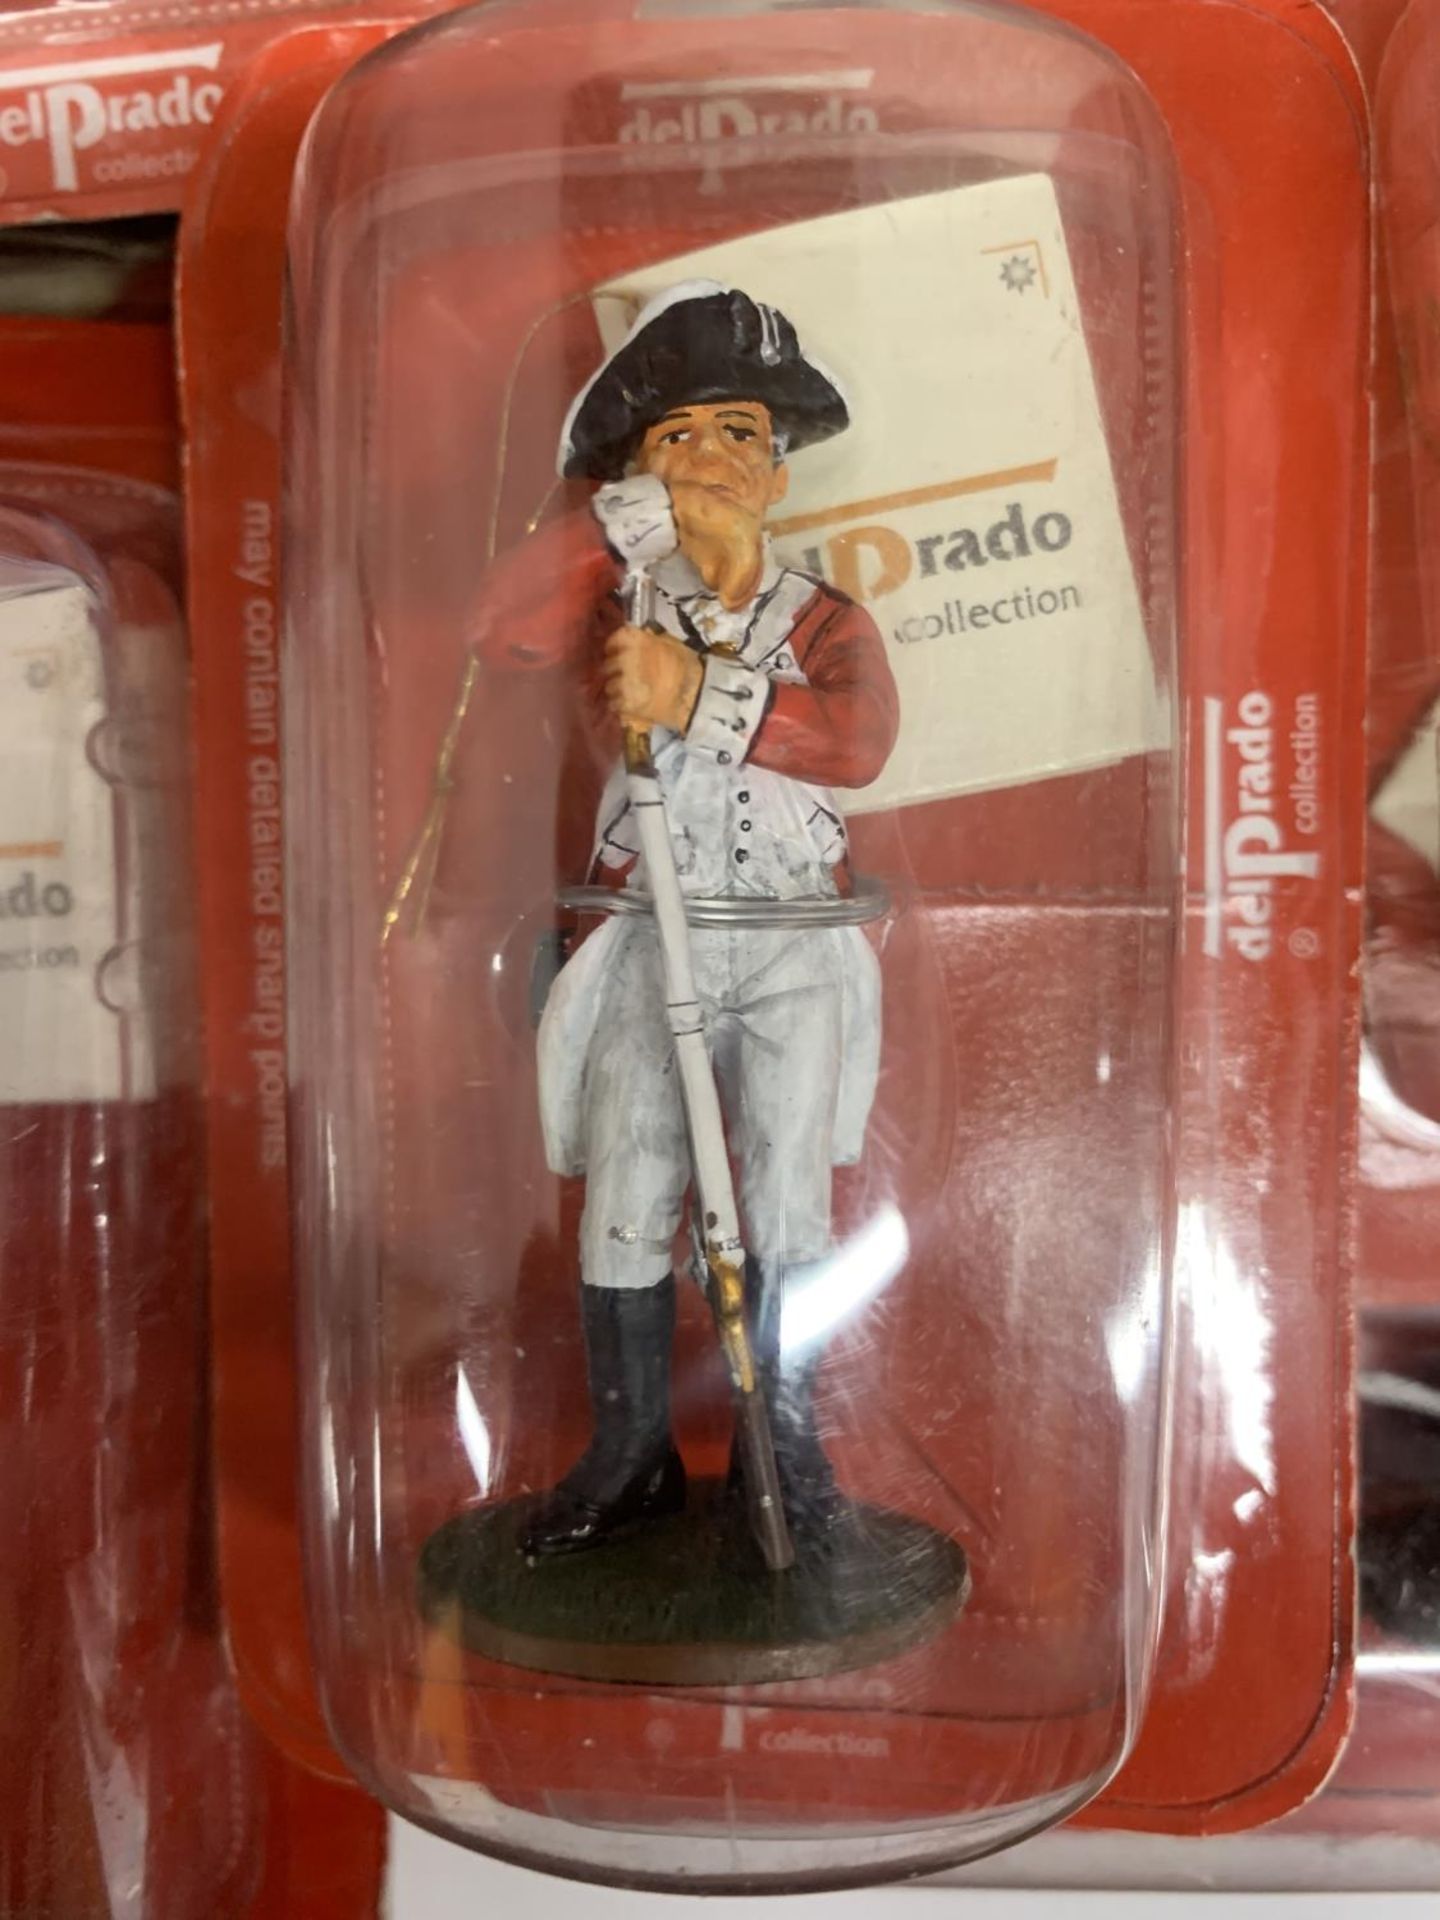 A LARGE COLLECTION OF DEL PRADO MILITARY FIGURES IN BLISTER PACKS - Image 6 of 8